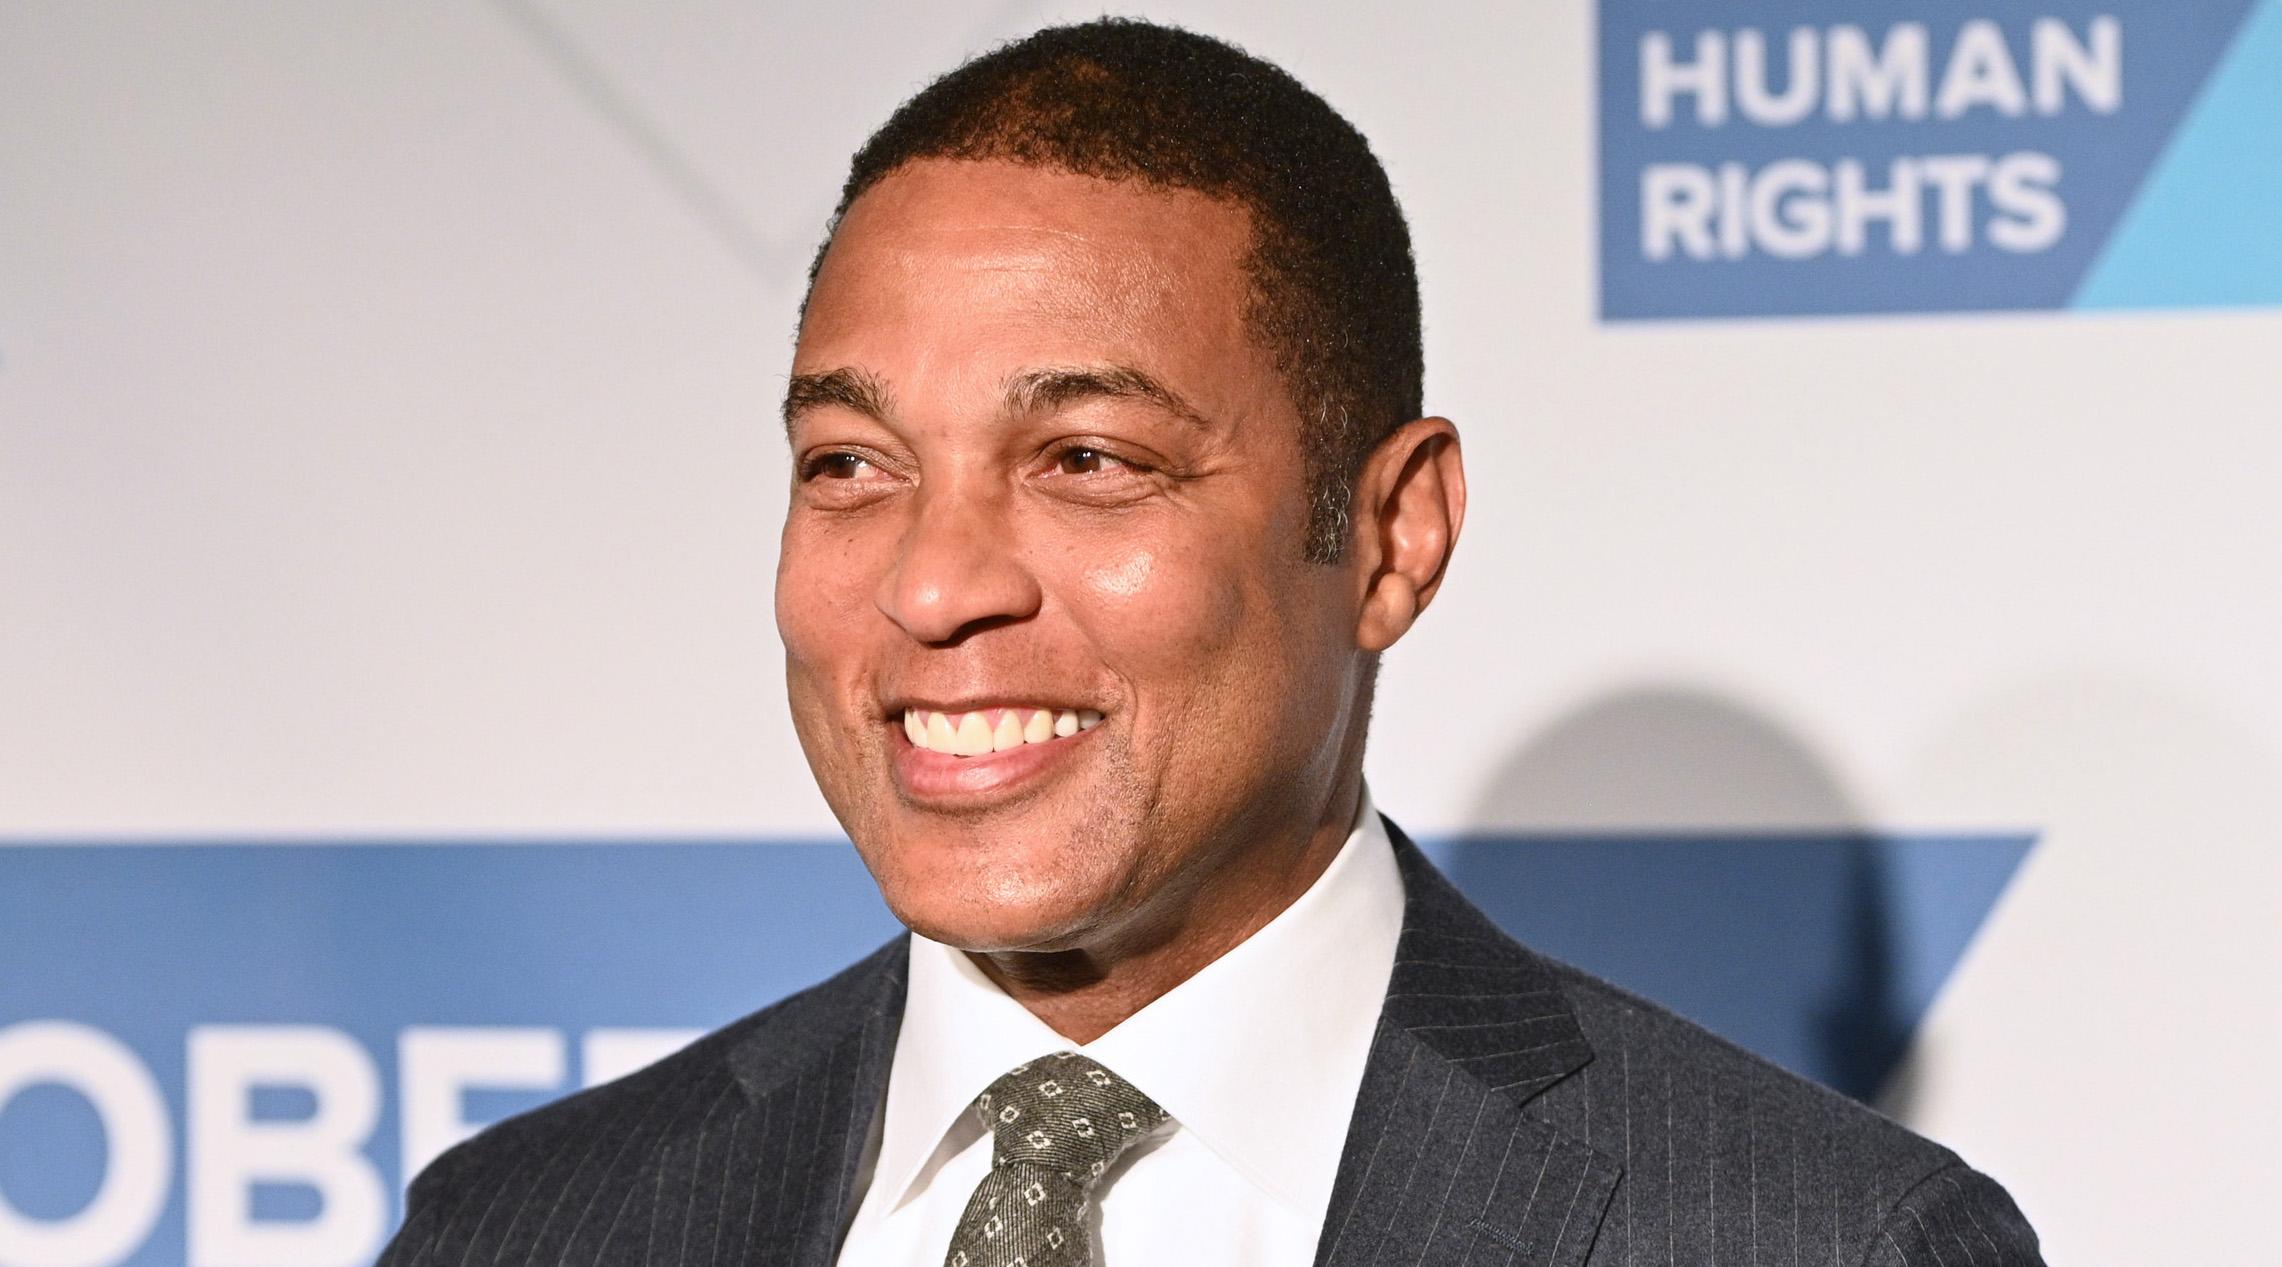 What is Don Lemon's net worth? What was the former CNN news